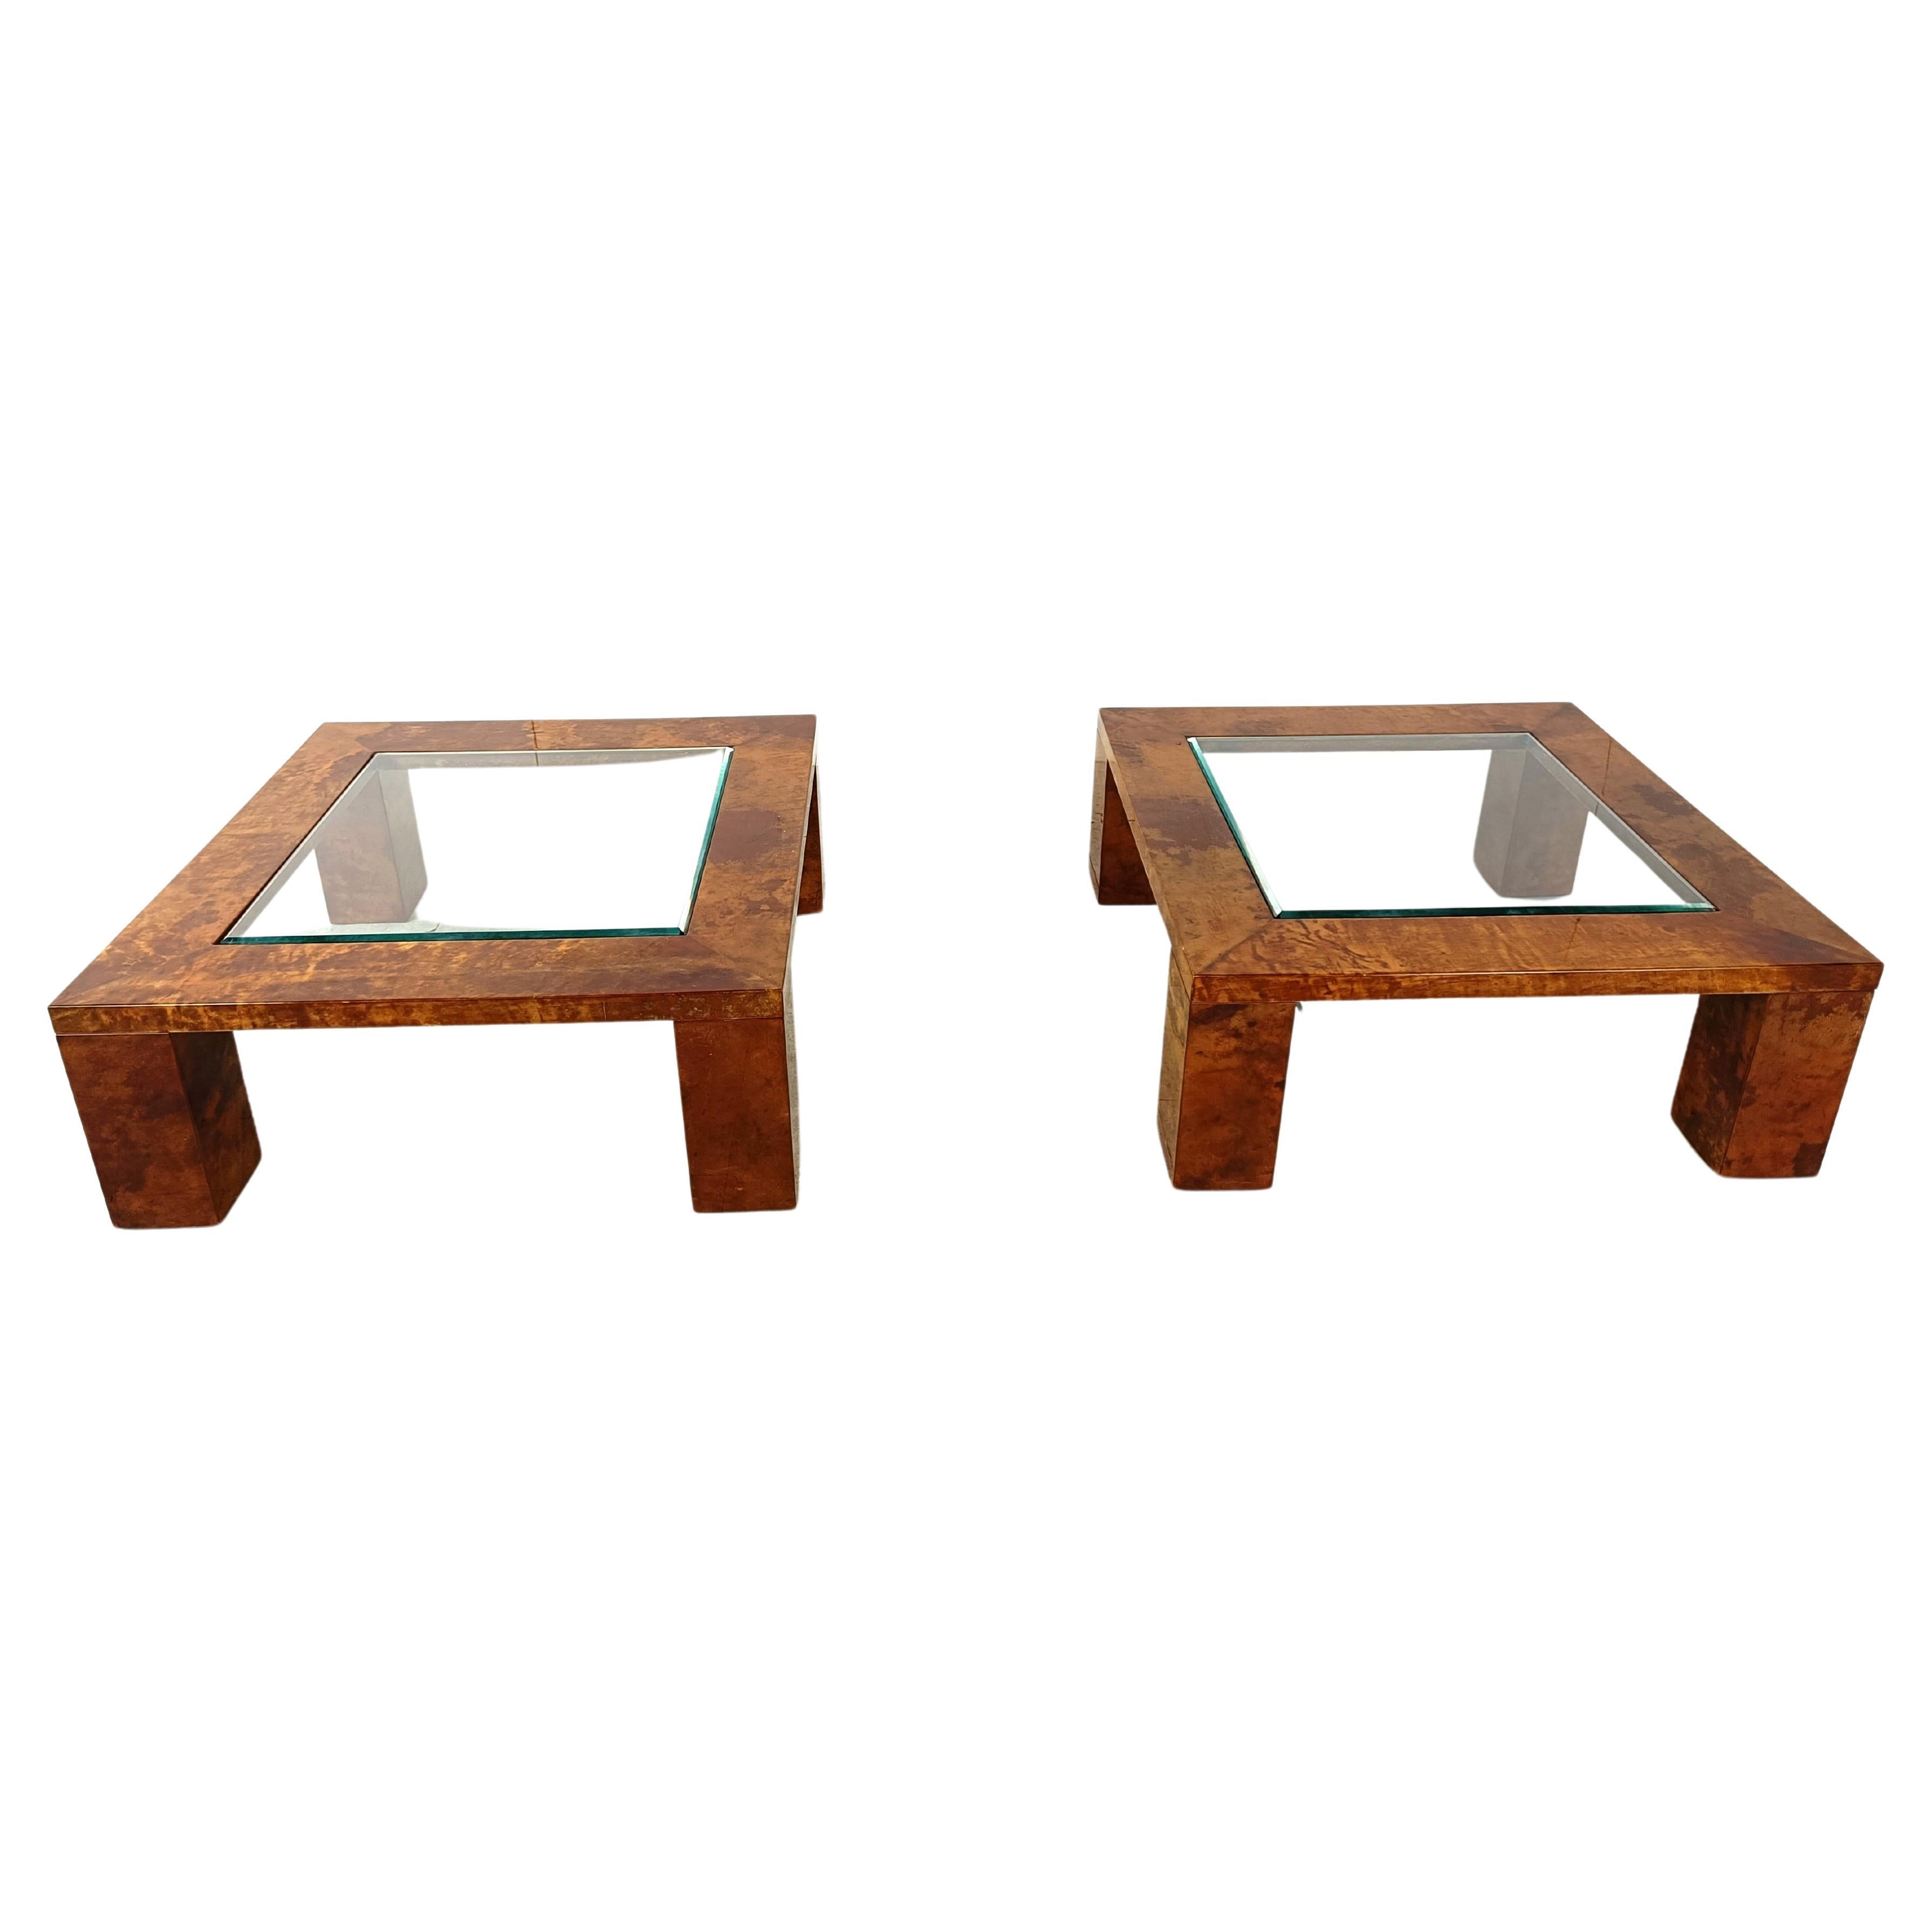 Aldo Tura Lacquered Goatskin Coffee Tables, 1960s - set of 2 For Sale